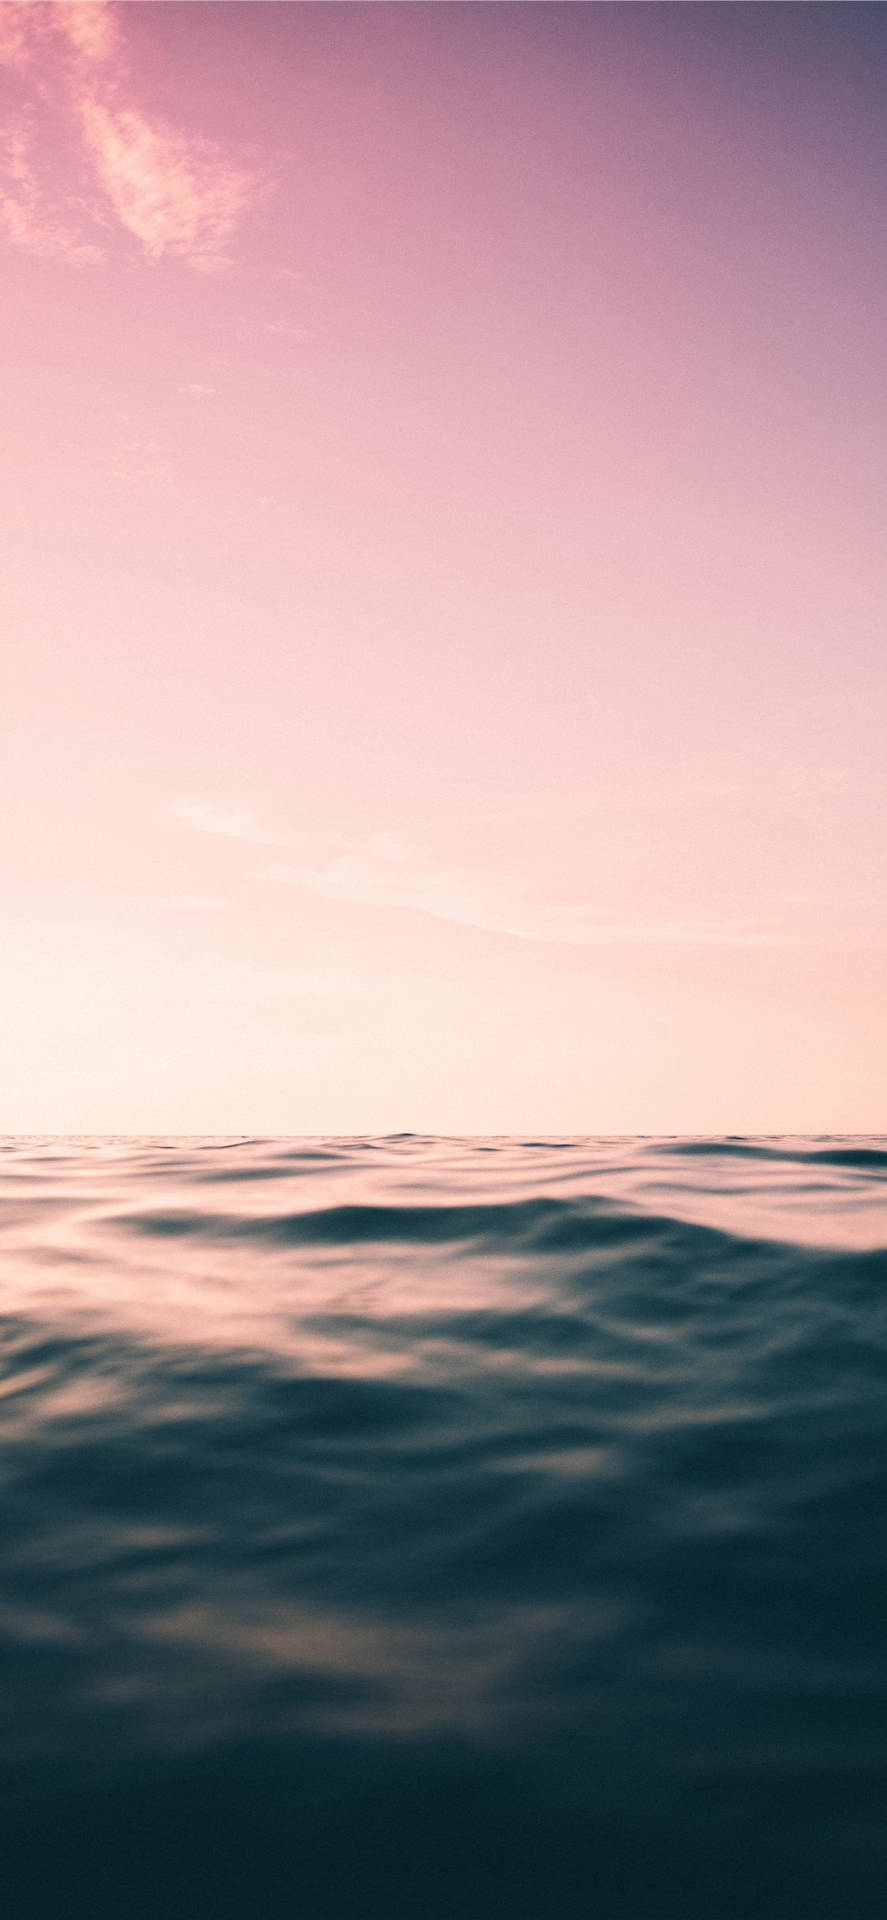 Aesthetic Ocean Water For Iphone Background